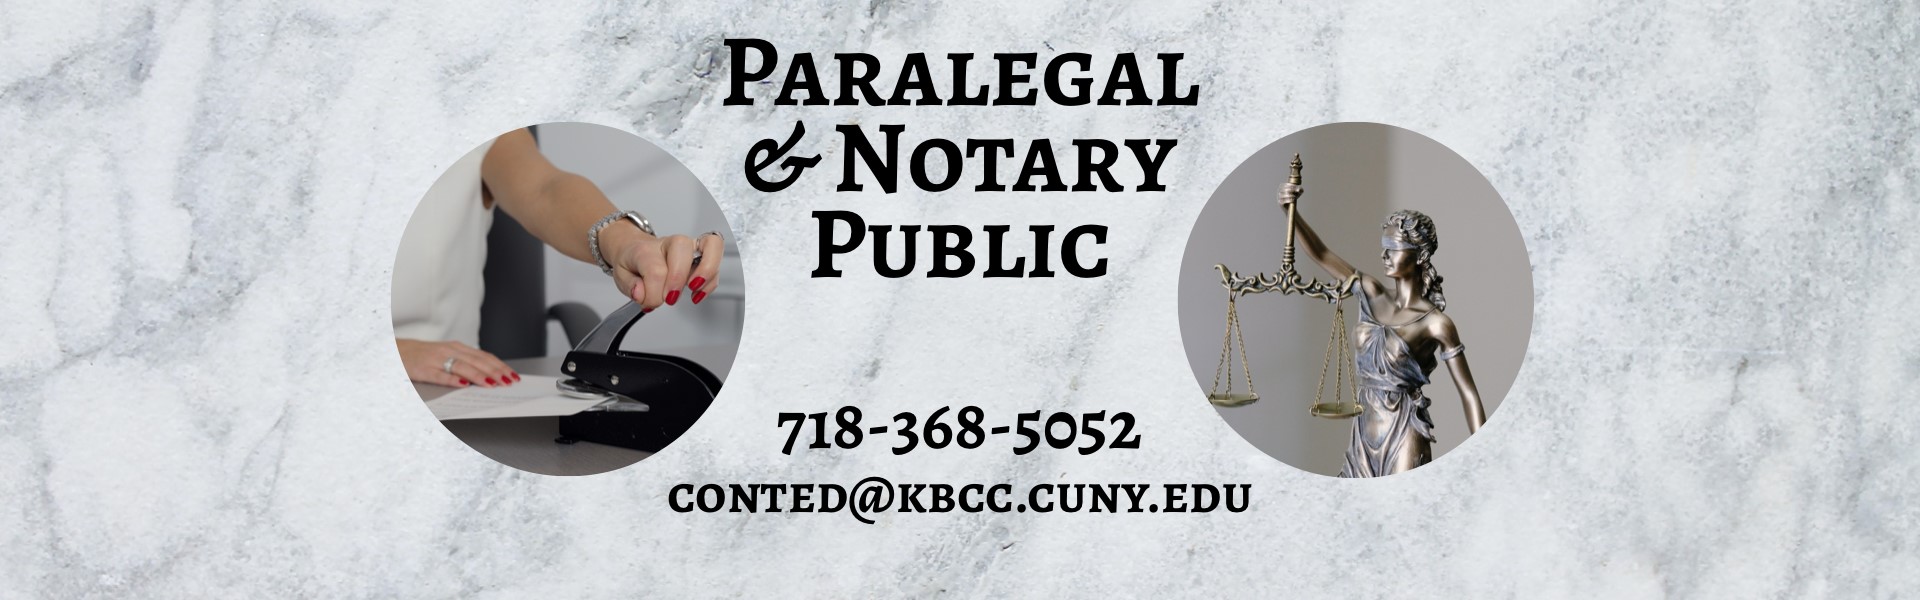 Paralegal and Notary Public